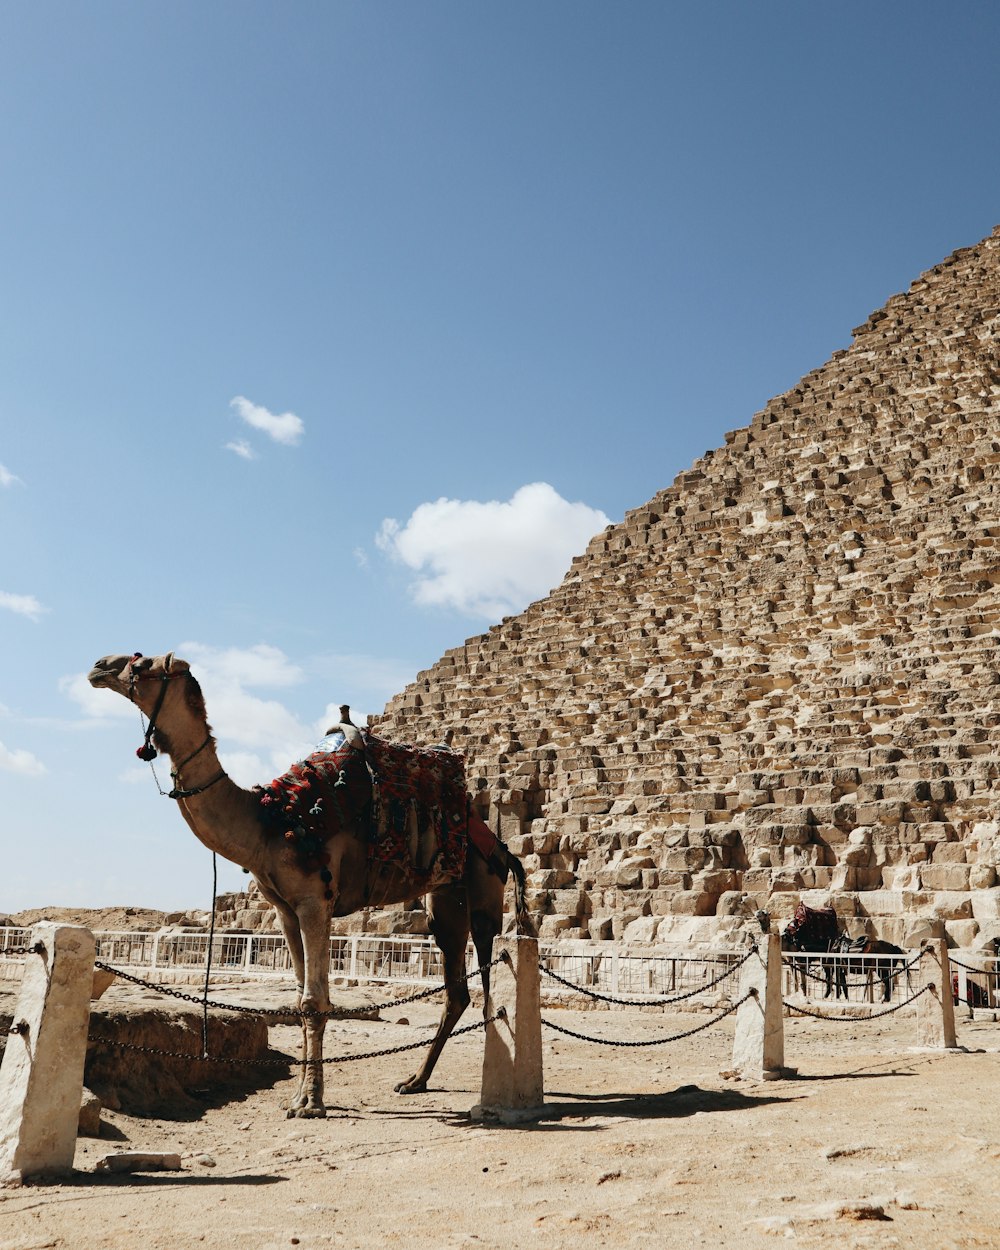 a camel standing in front of a very tall pyramid